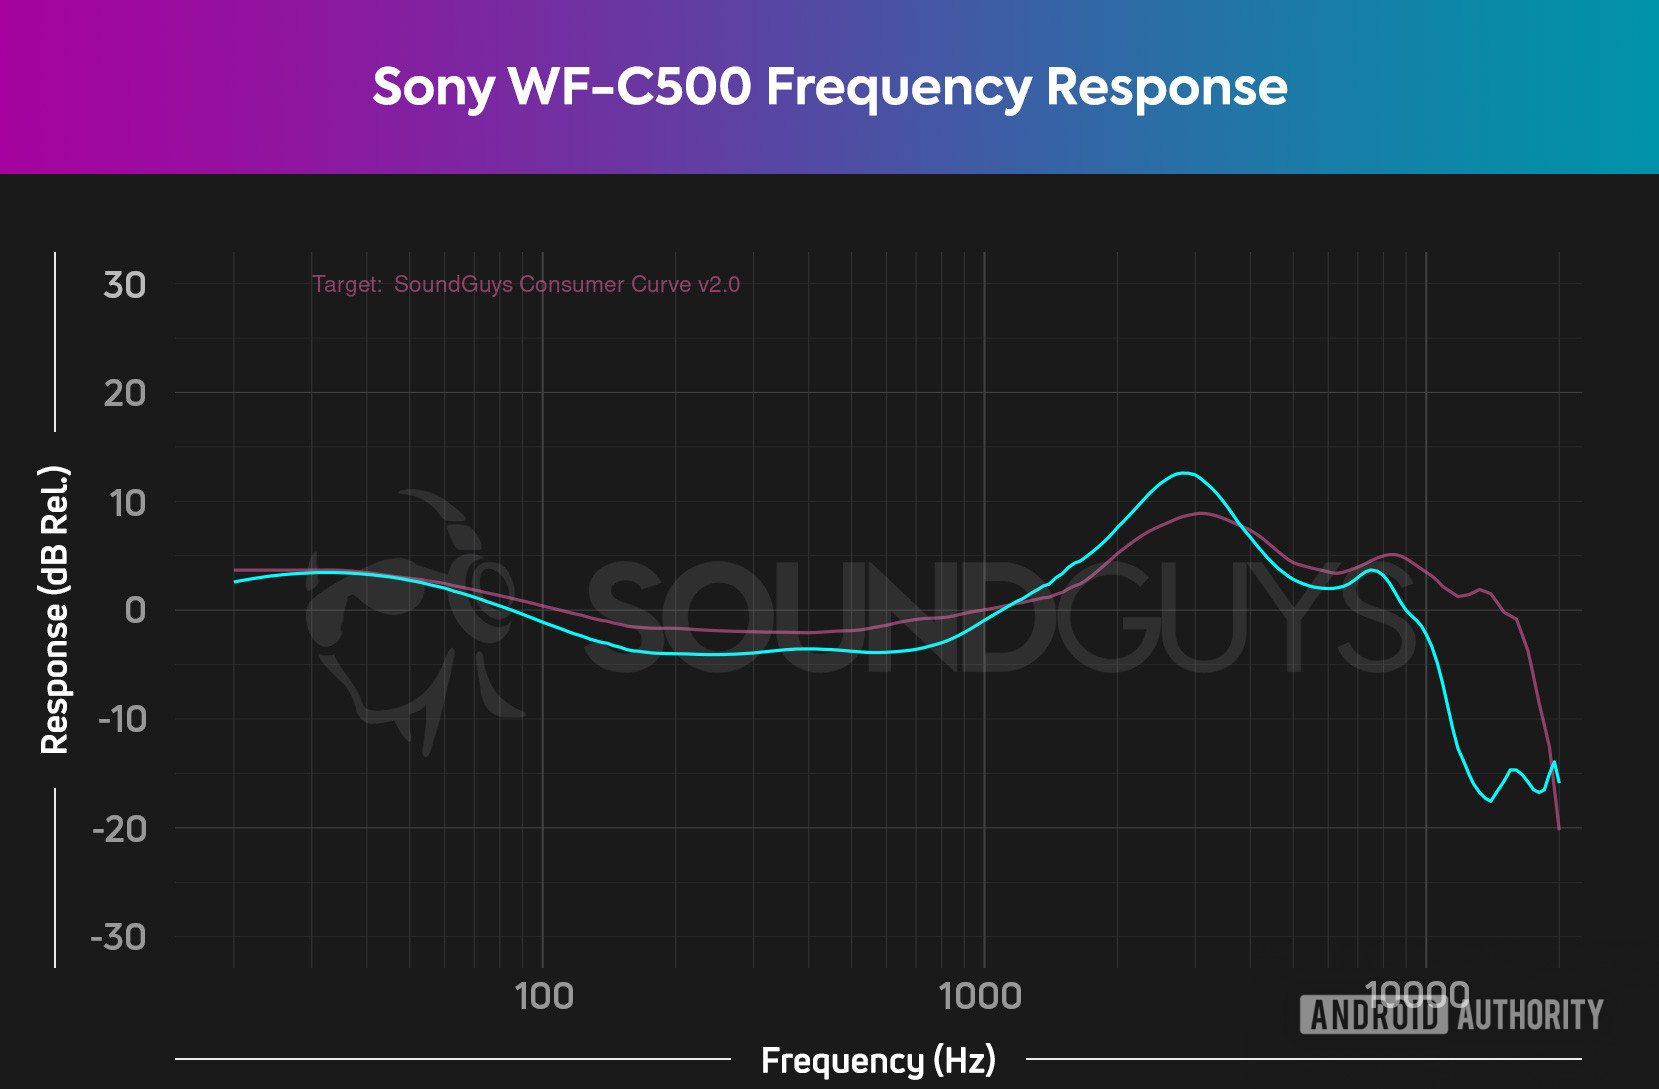 A chart depicts the Sony WF-C500 (cyan) frequency response relative to the SoundGuys Consumer Curve V2.0 (pink), revealing the Sony earbuds' generally pleasing sound with slightly amplified upper-midrange notes. The WF-C500 (cyan) generally follows our house curve (pink) very closely, though the treble rolls off close to 10kHz